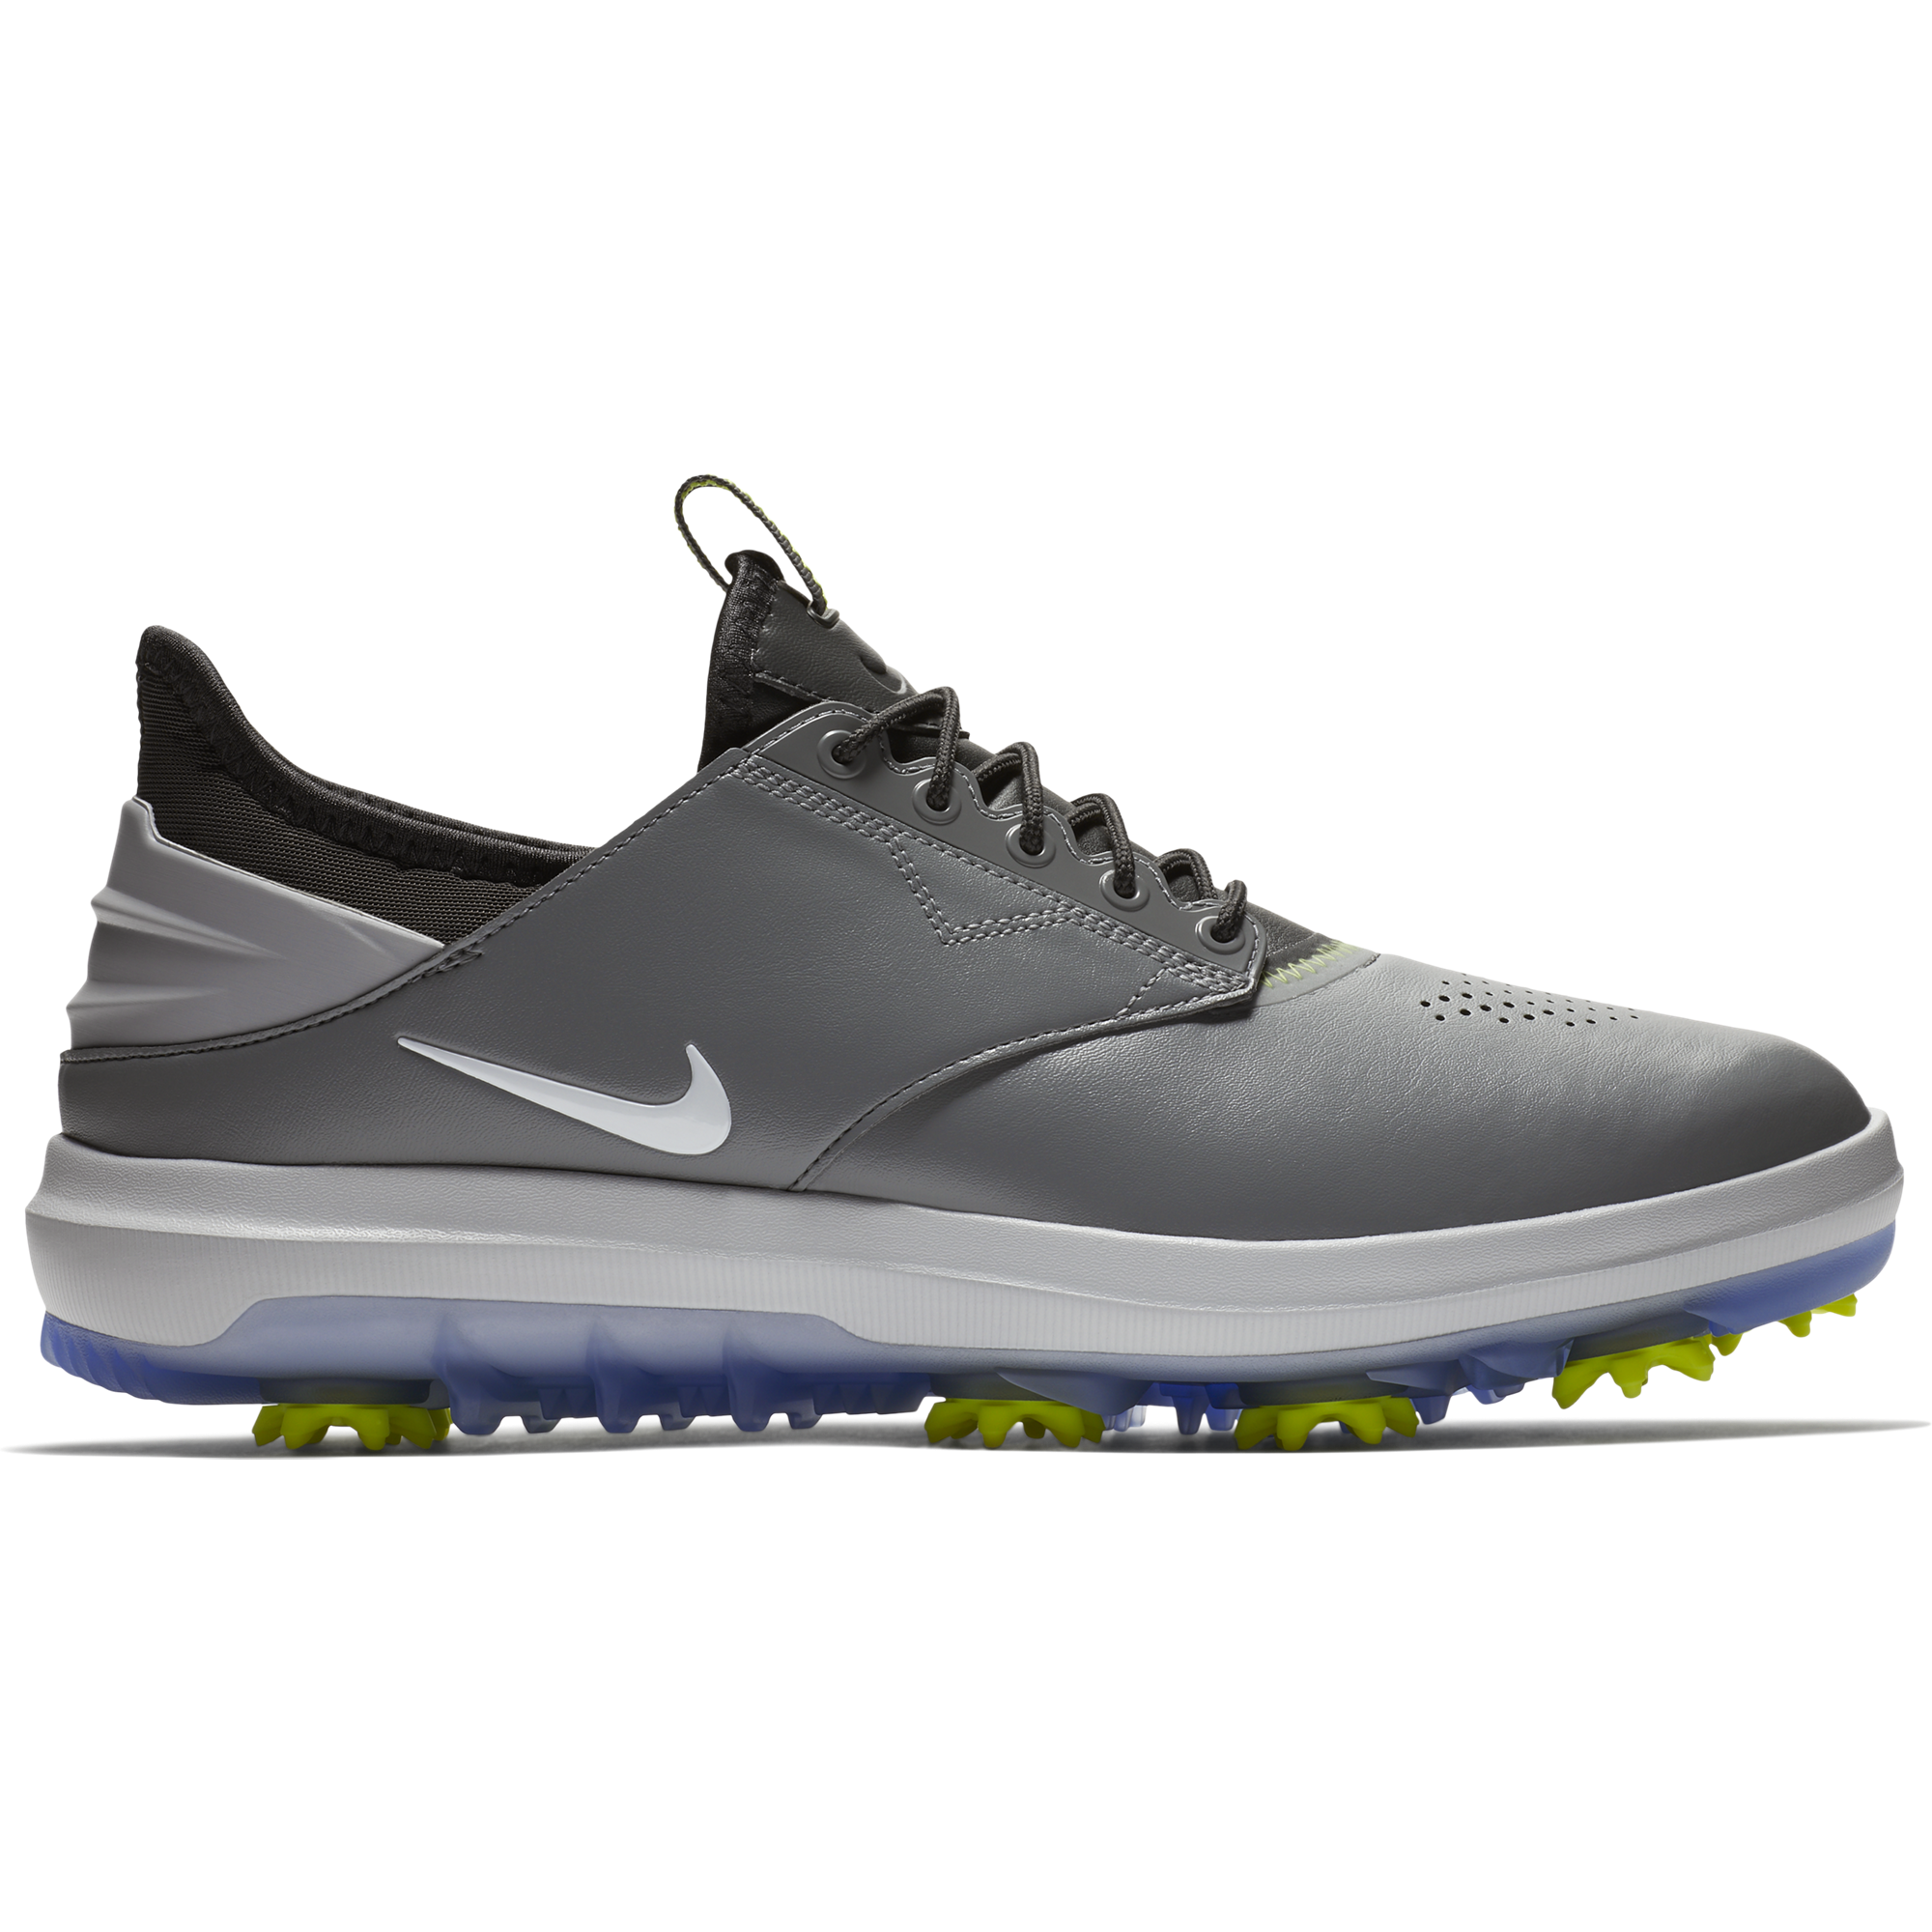 nike men's air zoom direct golf shoes